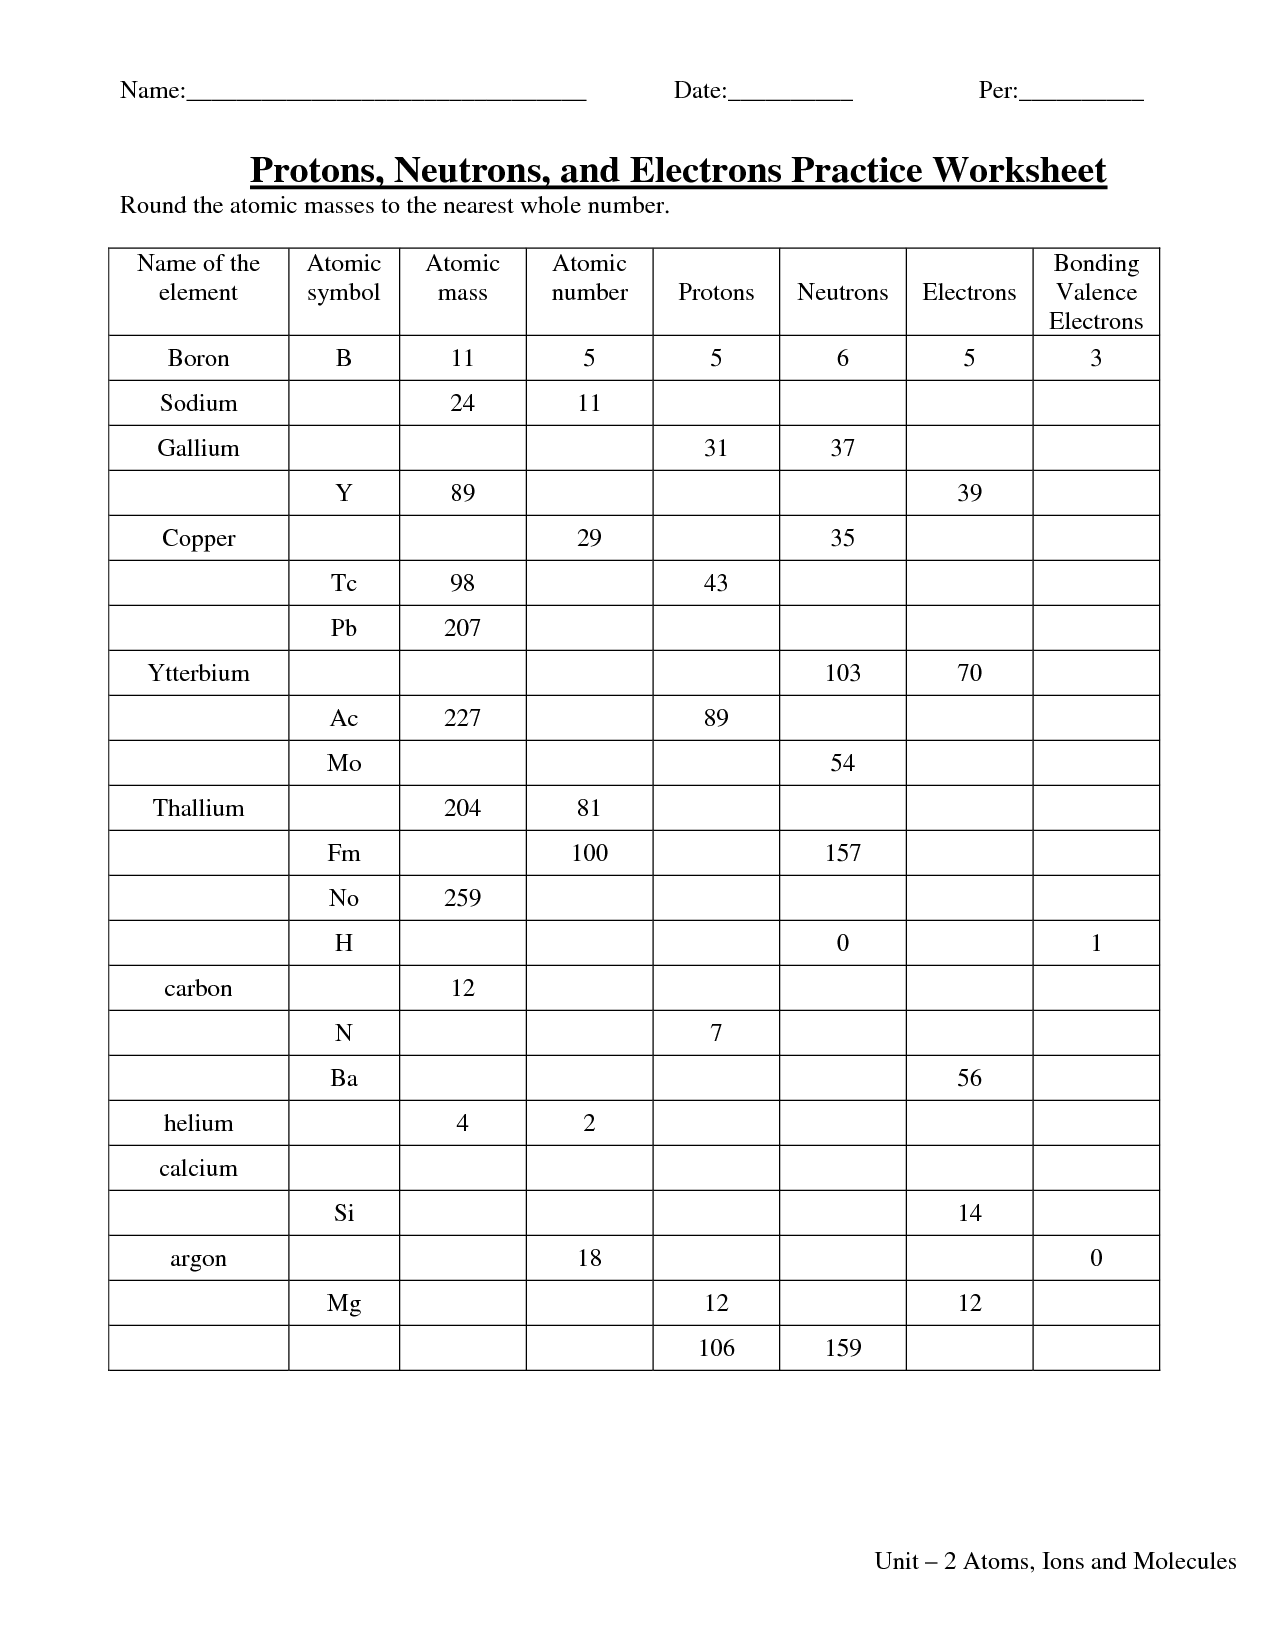 12-best-images-of-protons-neutrons-electrons-practice-worksheet-answers-isotopes-worksheet